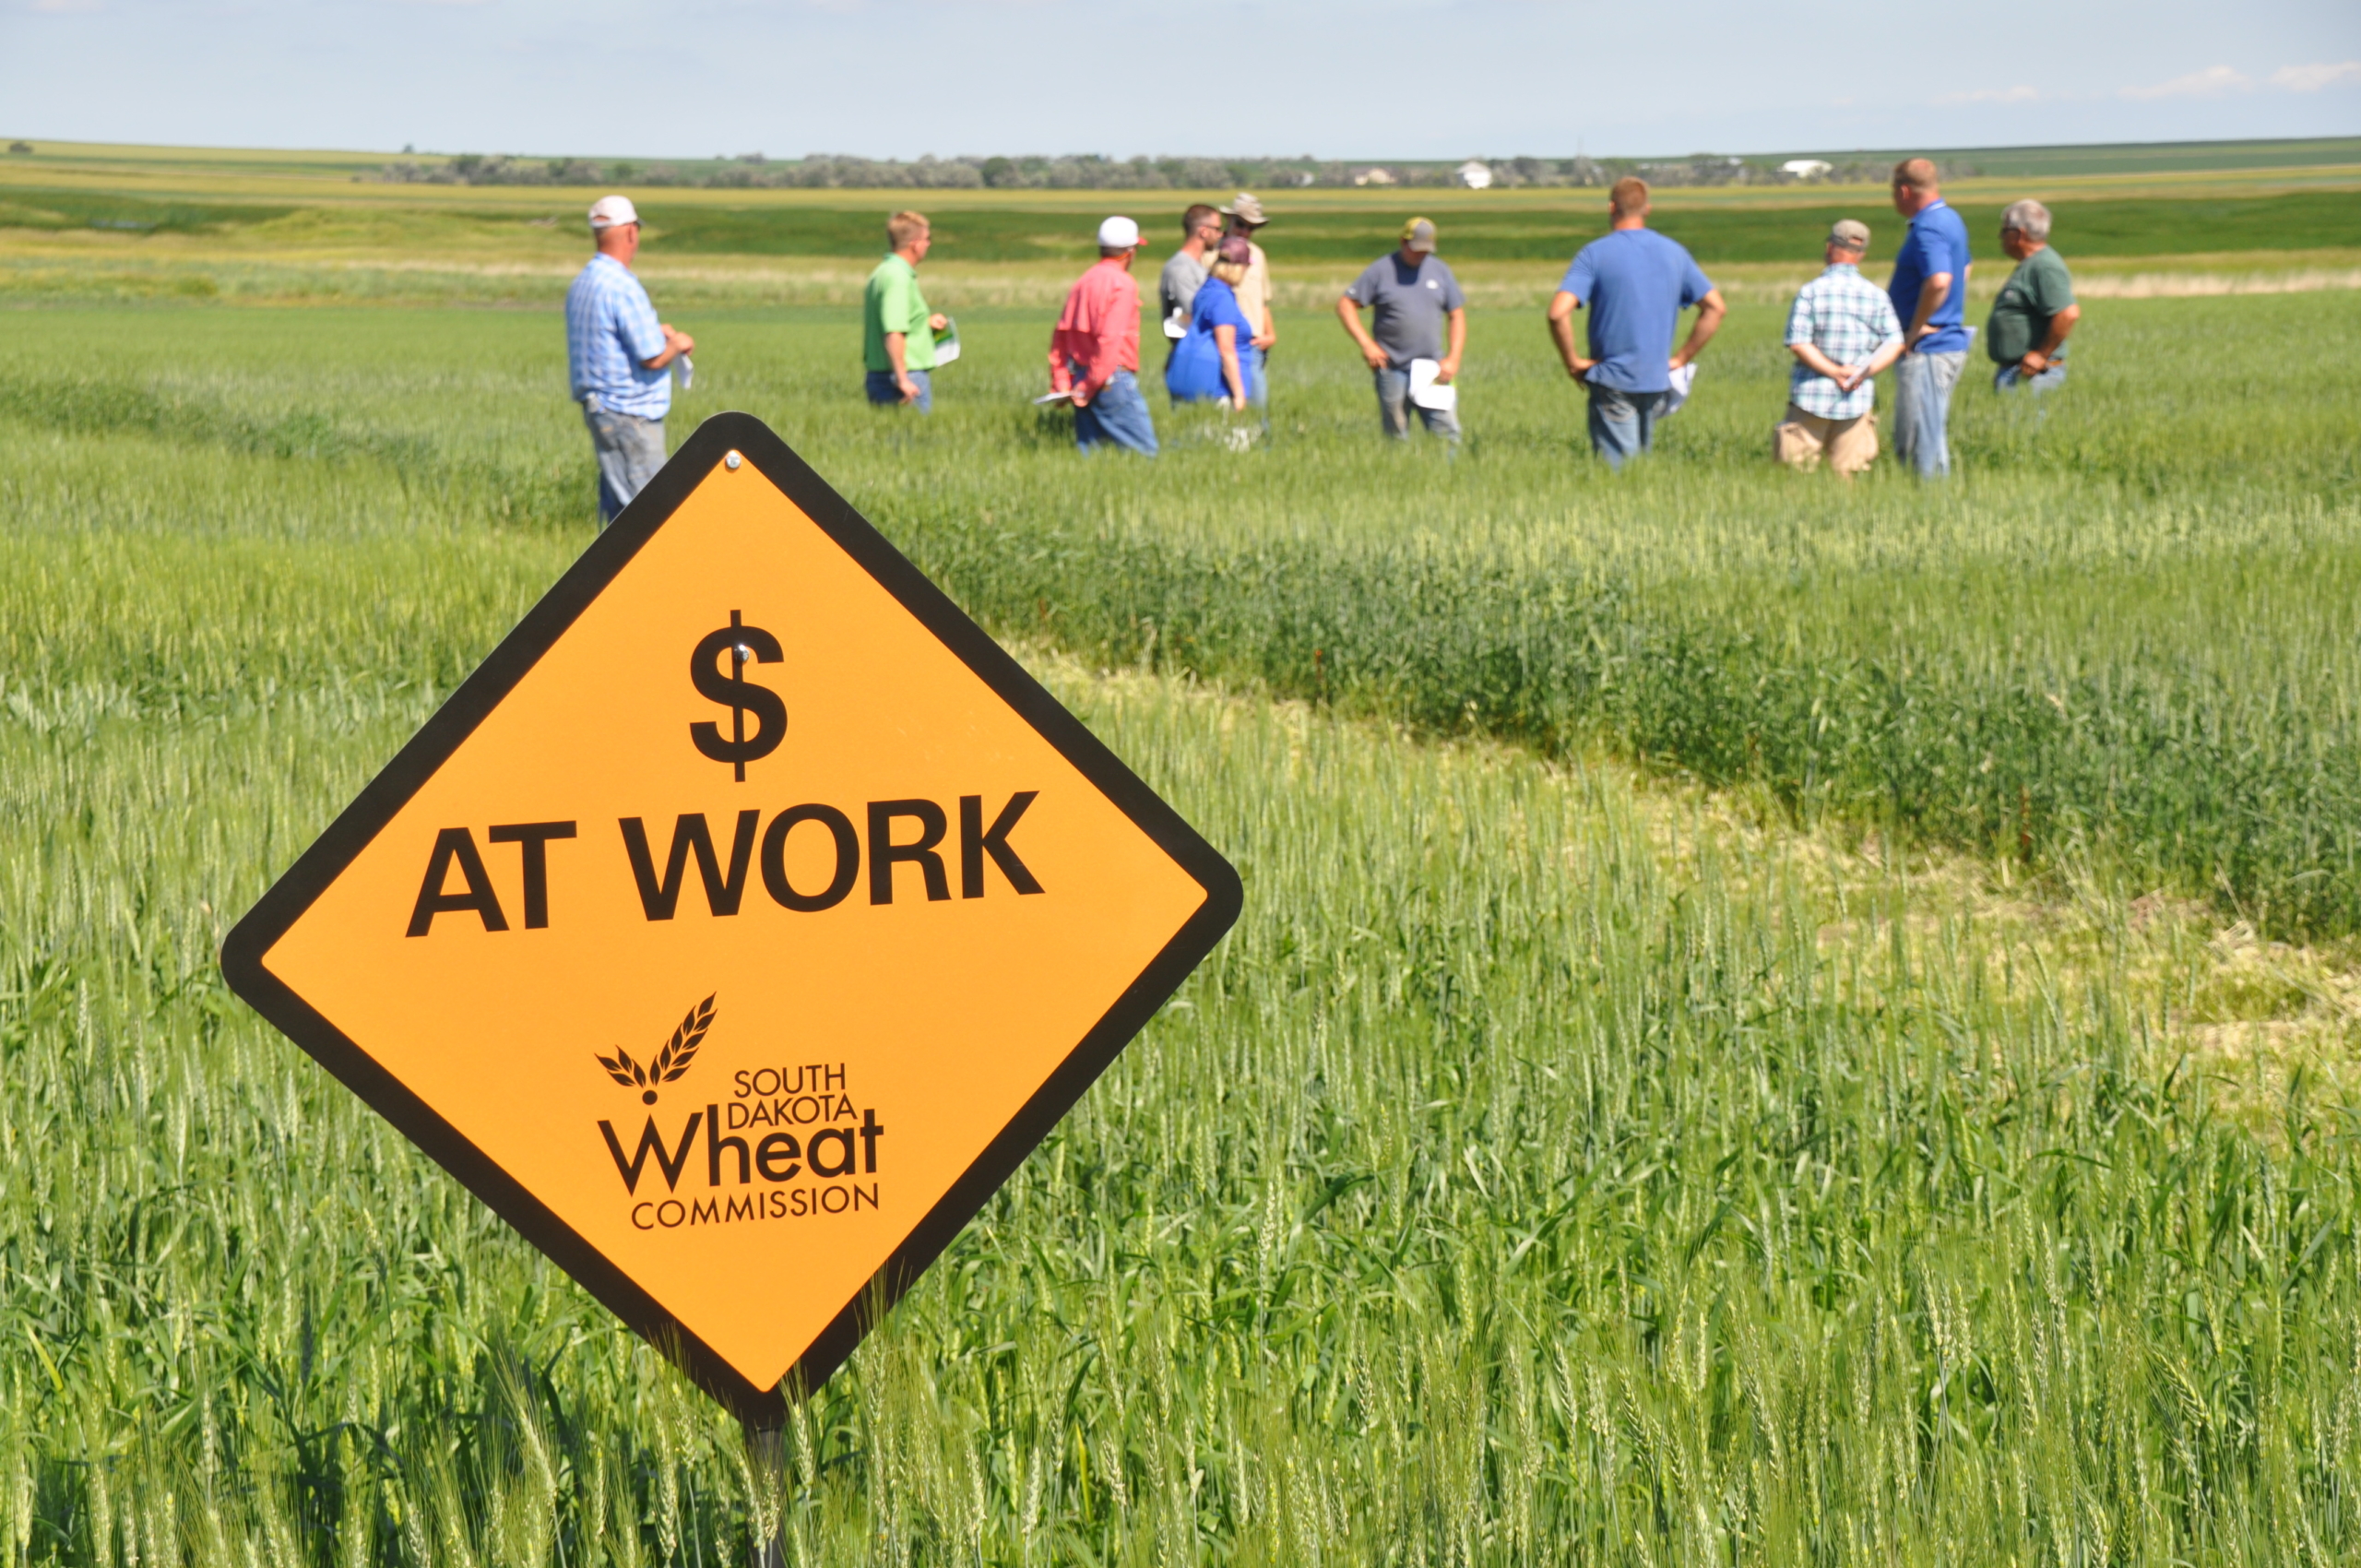 Public Wheat Breeding Programs are an investment by U.S. wheat farmers